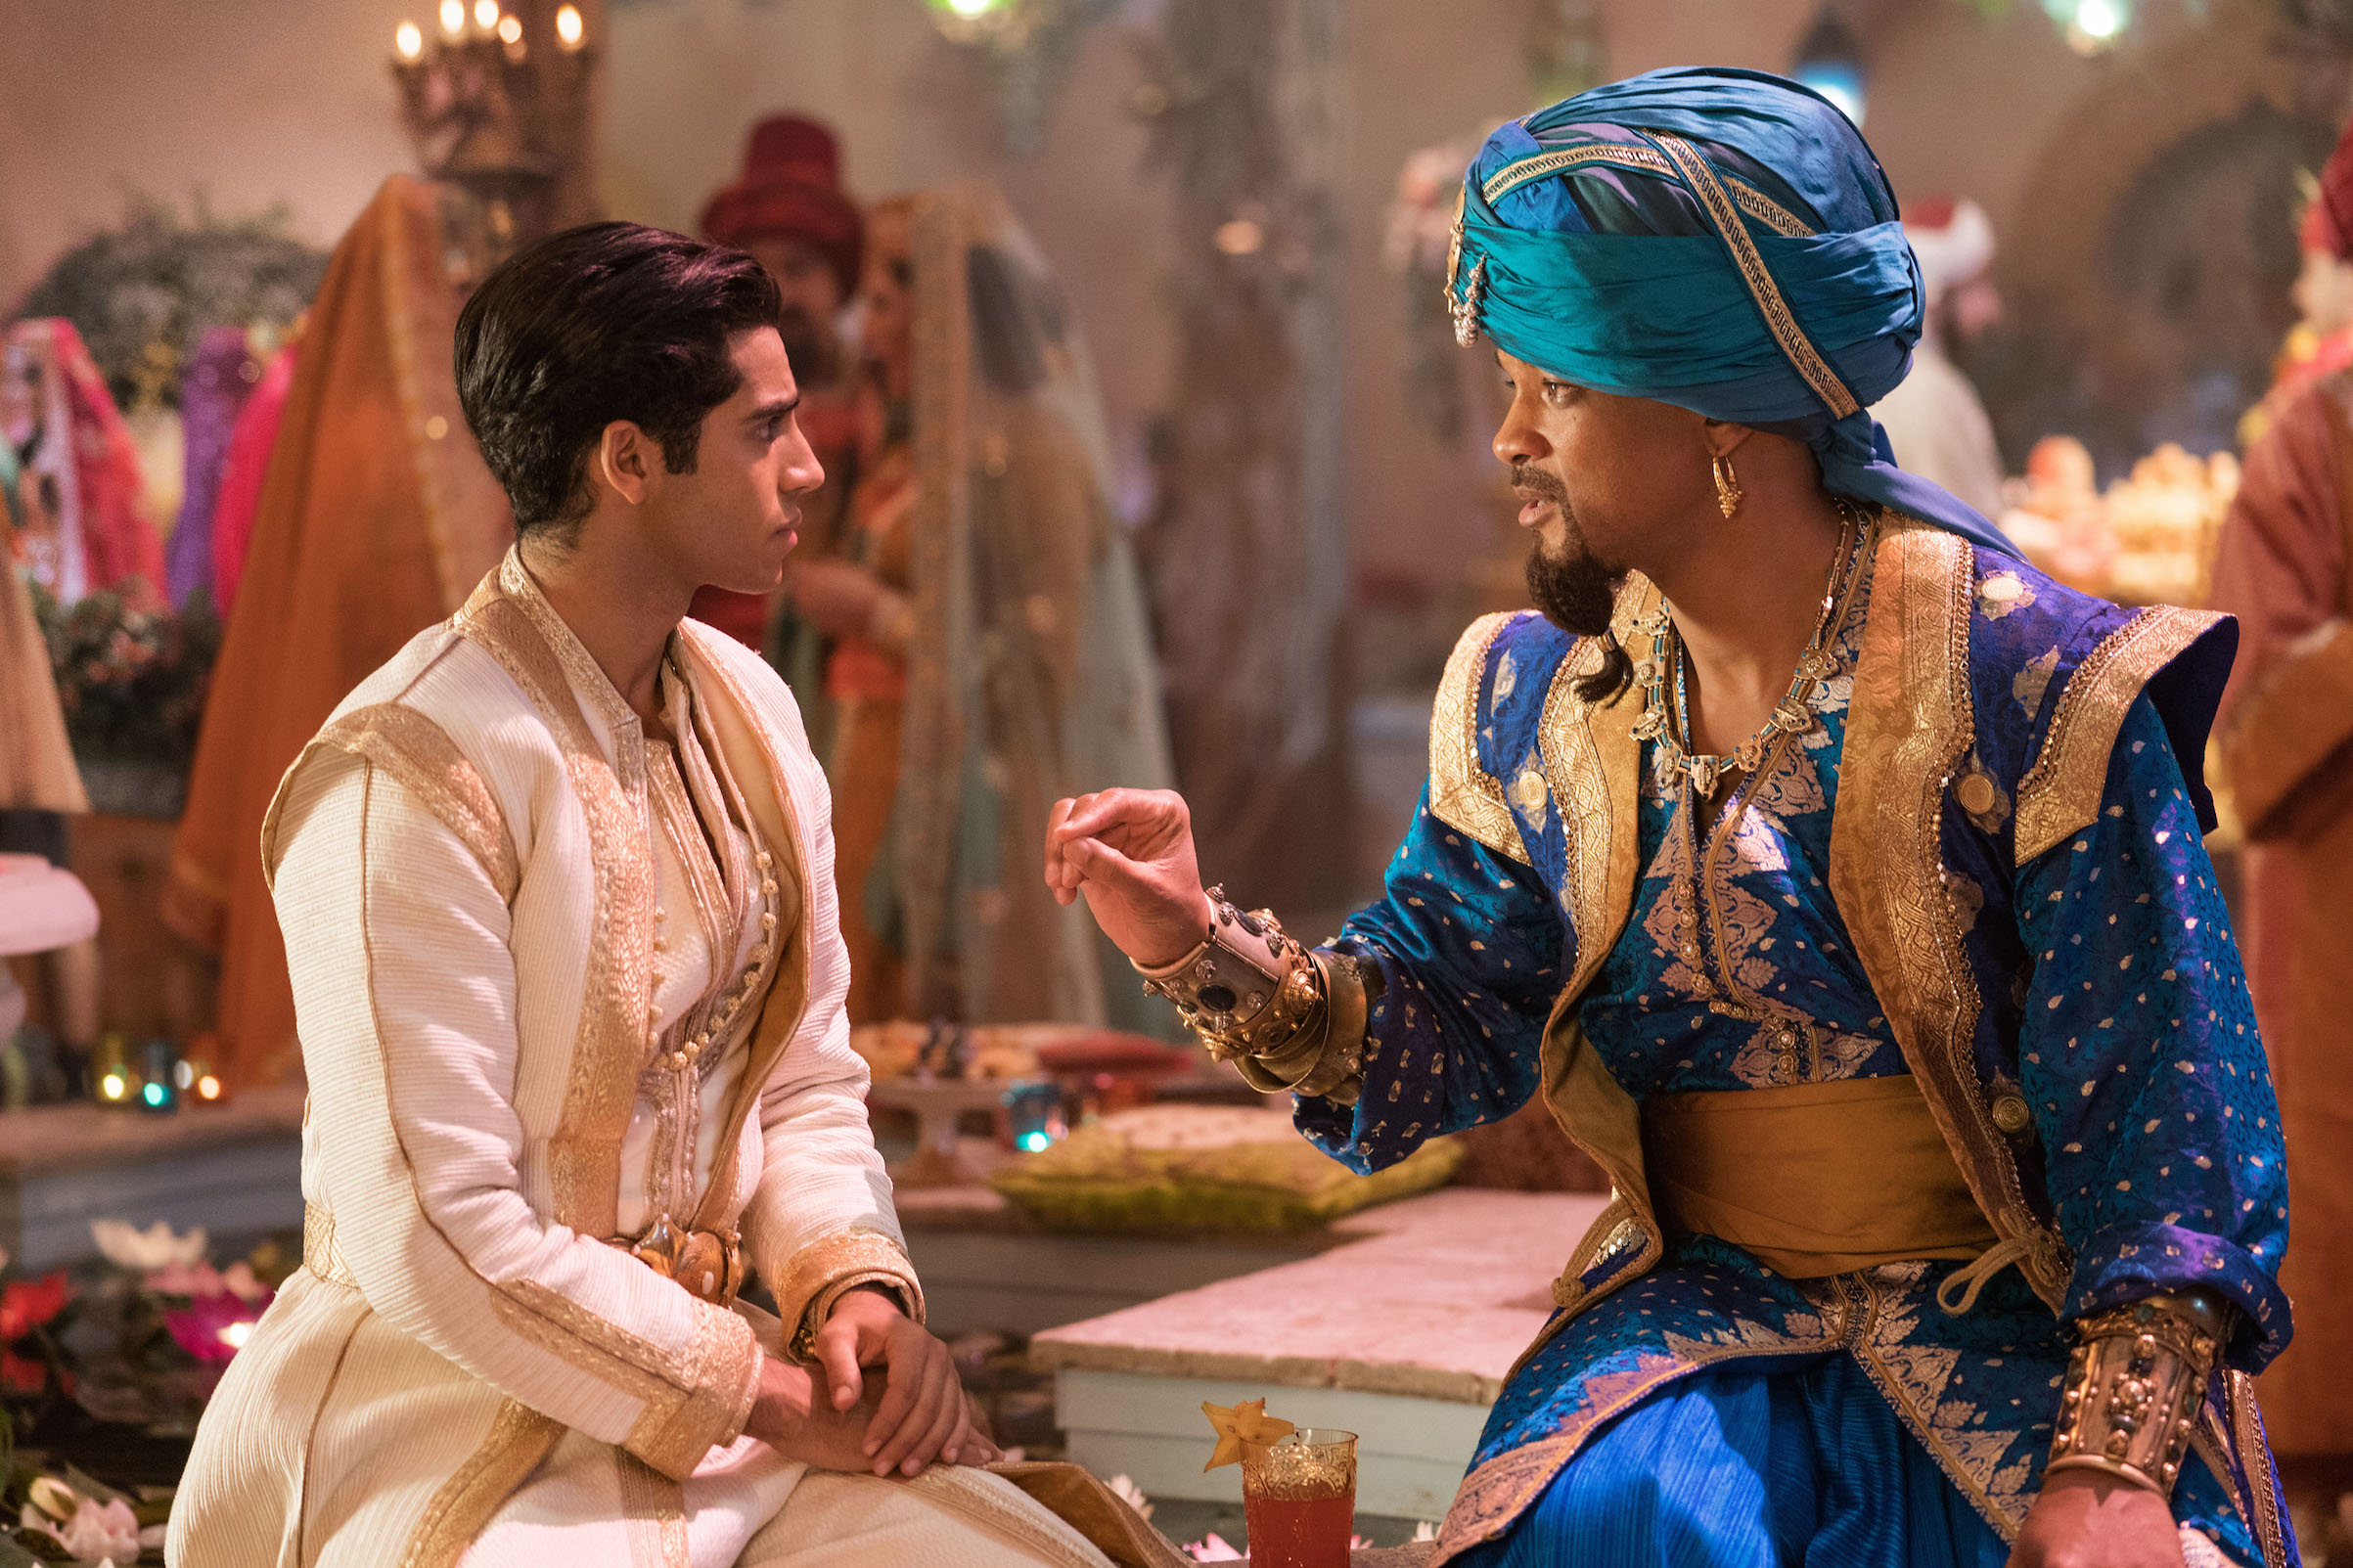 Will Smith is the Genie and Mena Massoud is Aladdin in Disney’s live-action Aladdin, directed by Guy Ritchie. (Photo Credit: Daniel Smith—Disney)